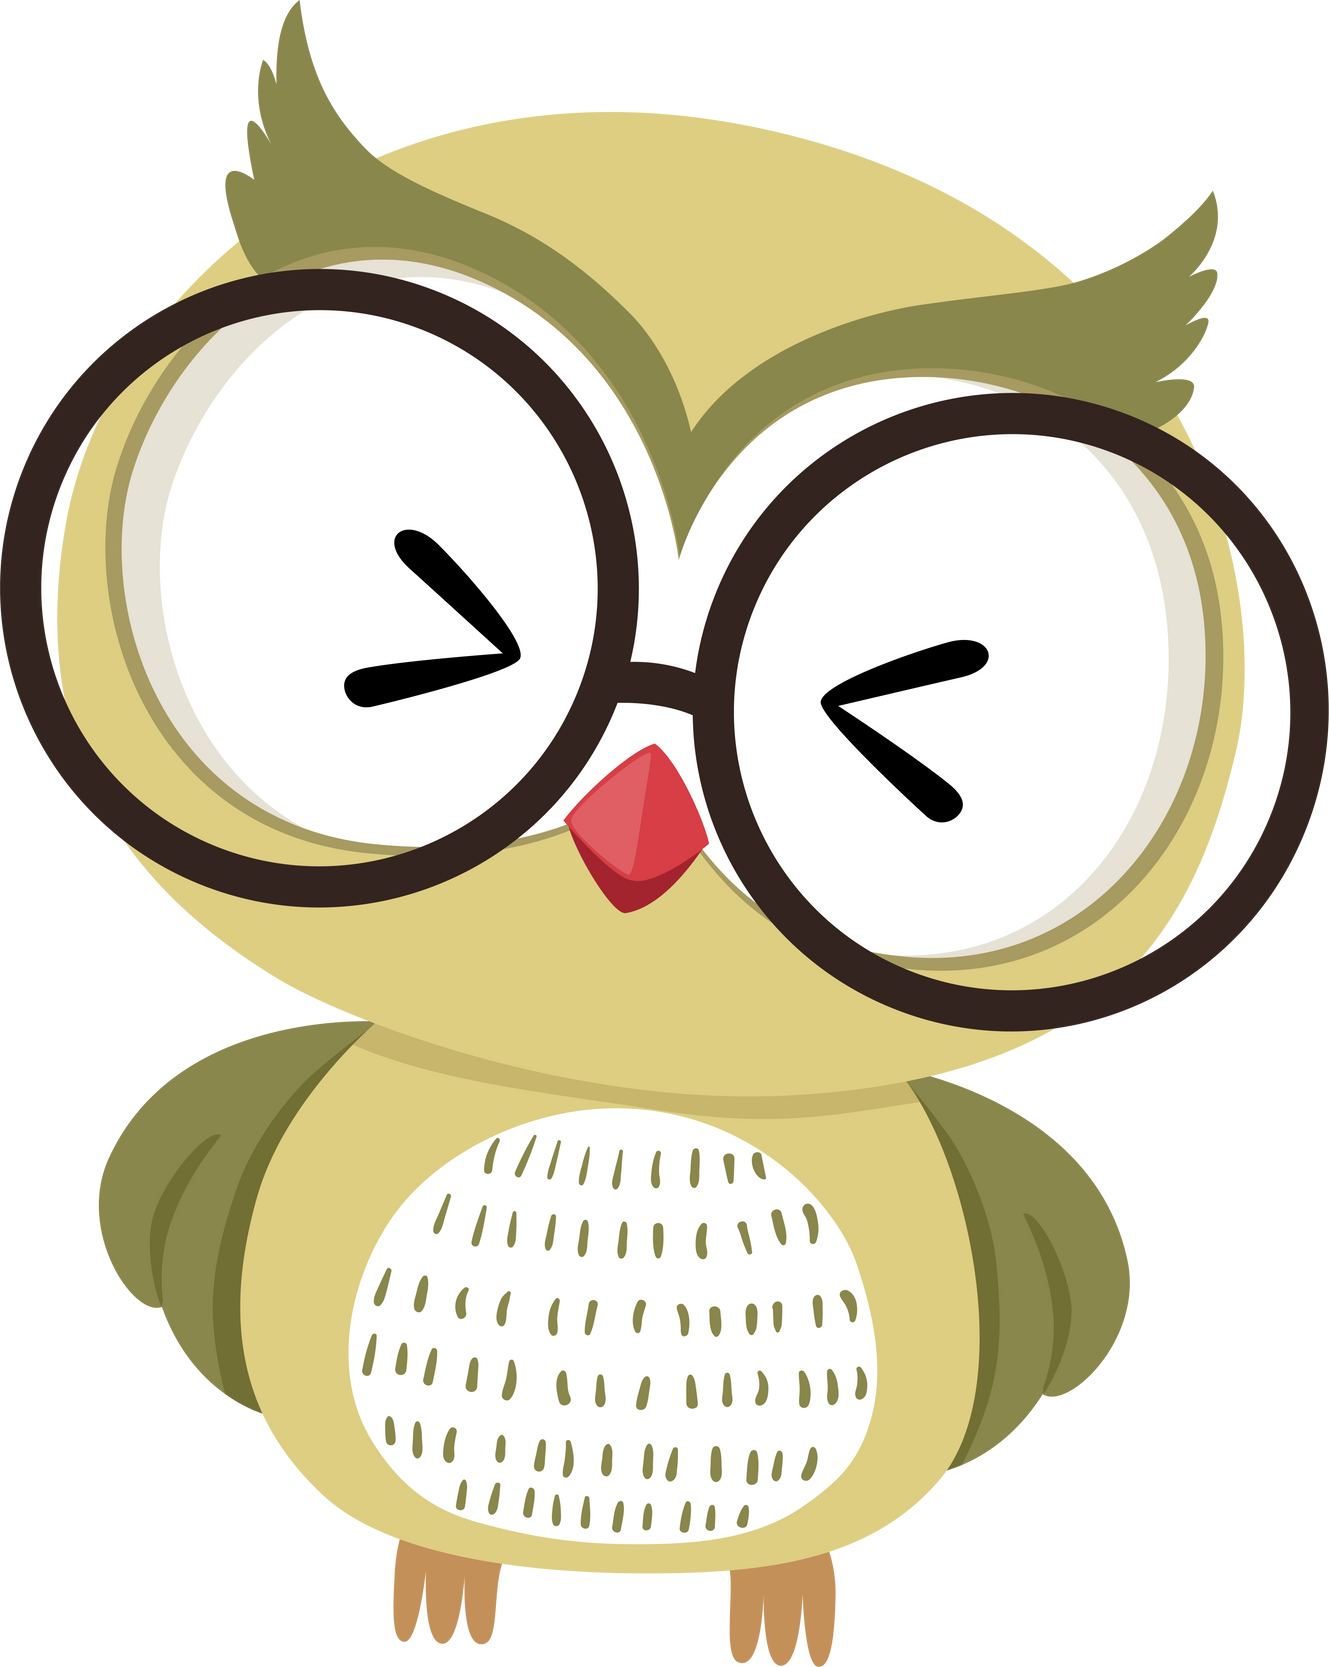 Owl with Glasses Illustration